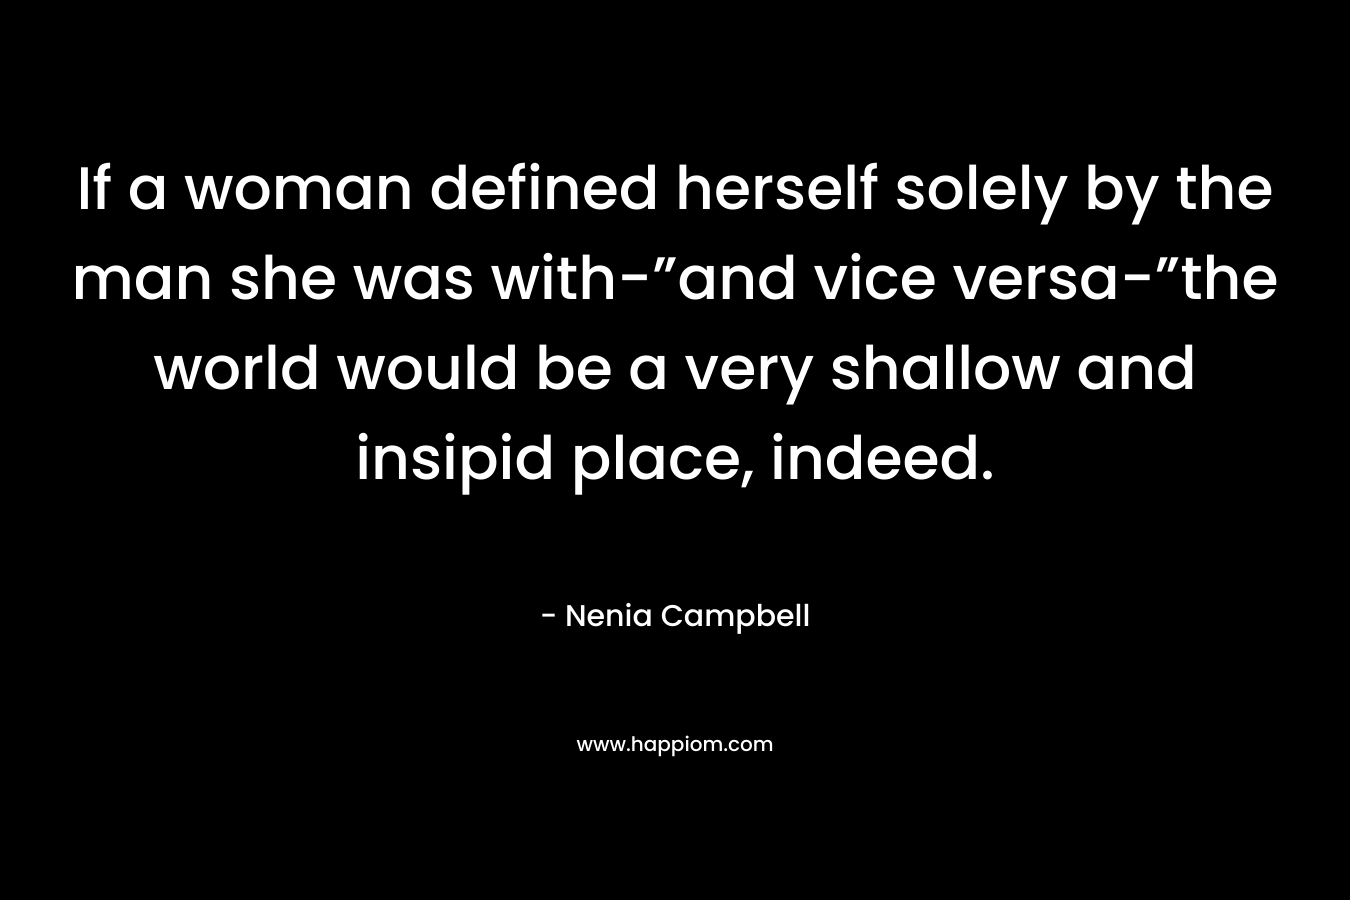 If a woman defined herself solely by the man she was with-”and vice versa-”the world would be a very shallow and insipid place, indeed.